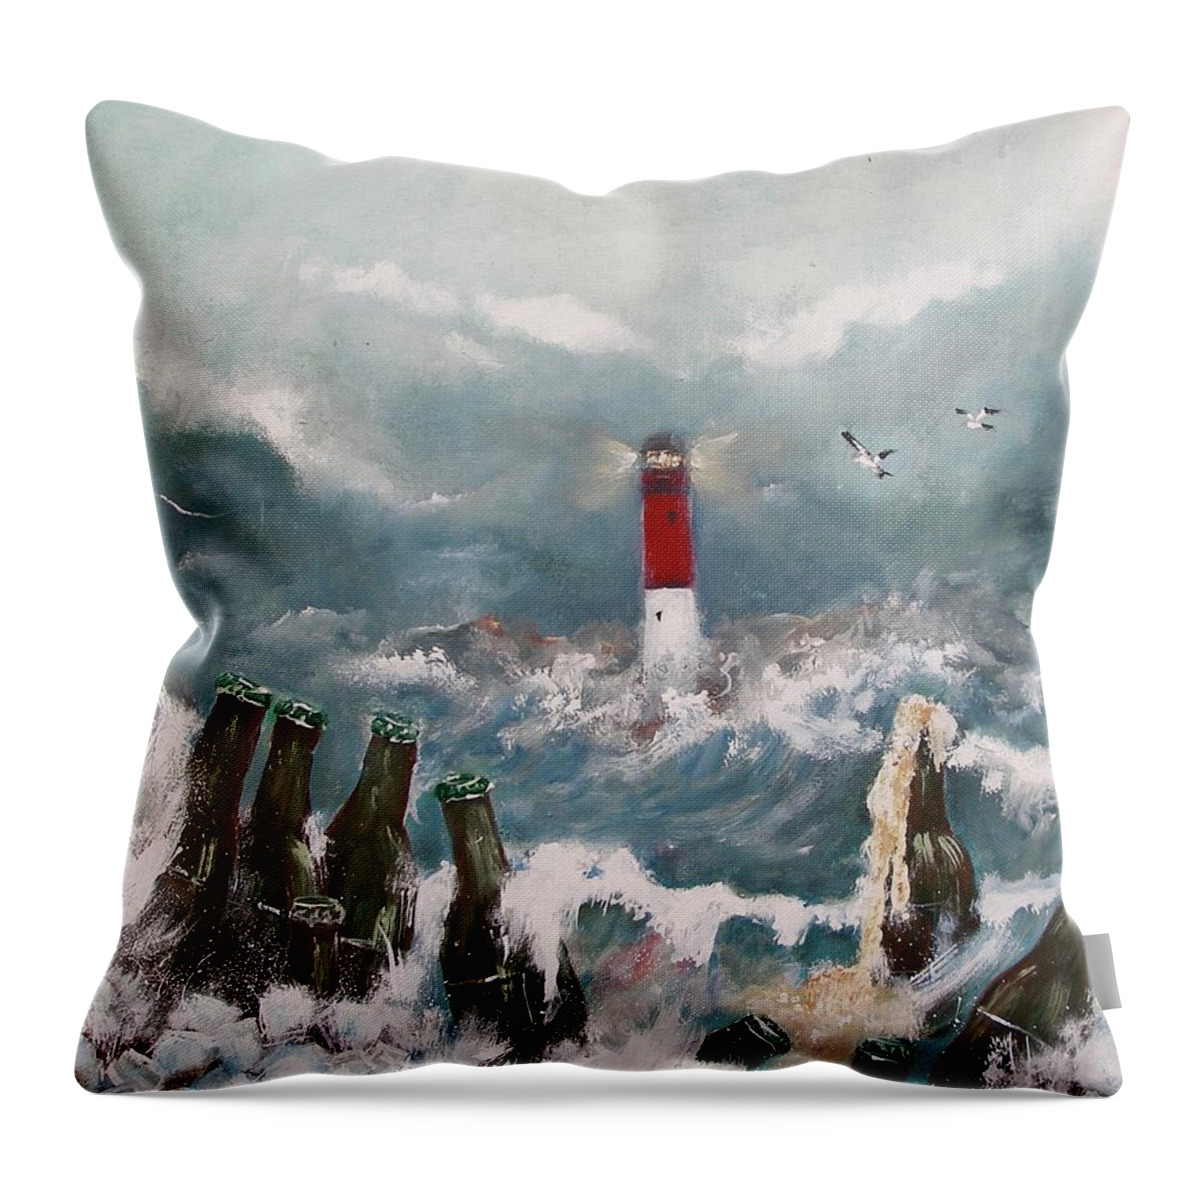 Drown In Alcohol Beer Bottle Wave Ocean Barnegat Lighthouse Water Whirlpool Abyss Blue Melt Depth Ice Cold Seagull Sky Jersey Shore Acrylic Painting Print Clouds Throw Pillow featuring the painting Drown In Alcohol by Miroslaw Chelchowski